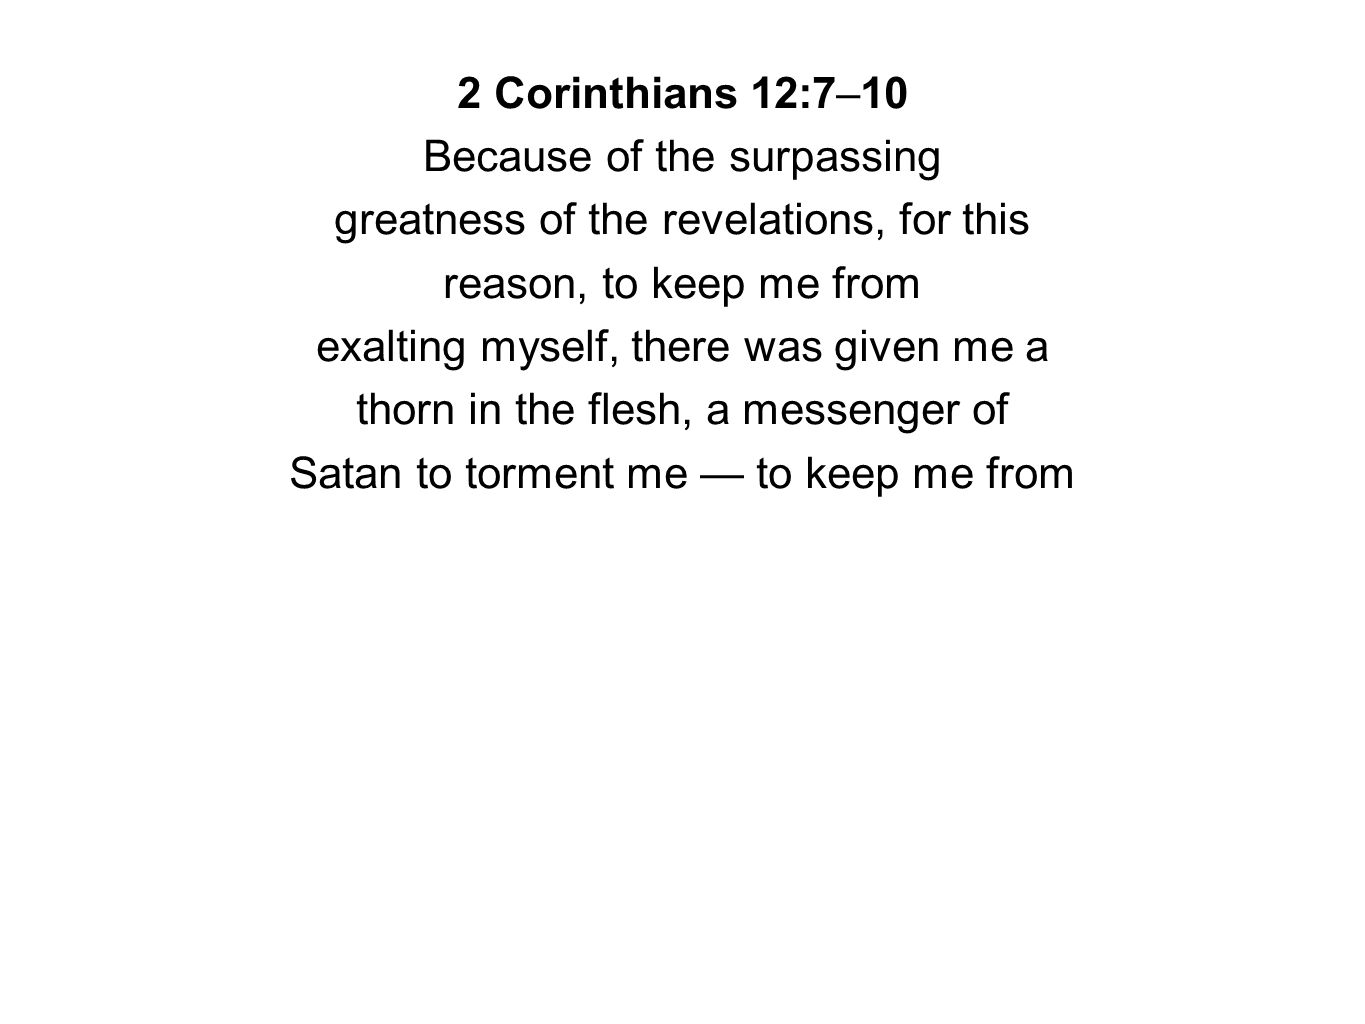 2 Corinthians 12:7–10 Because of the surpassing greatness of the revelations, for this reason, to keep me from exalting myself, there was given me a thorn in the flesh, a messenger of Satan to torment me — to keep me from